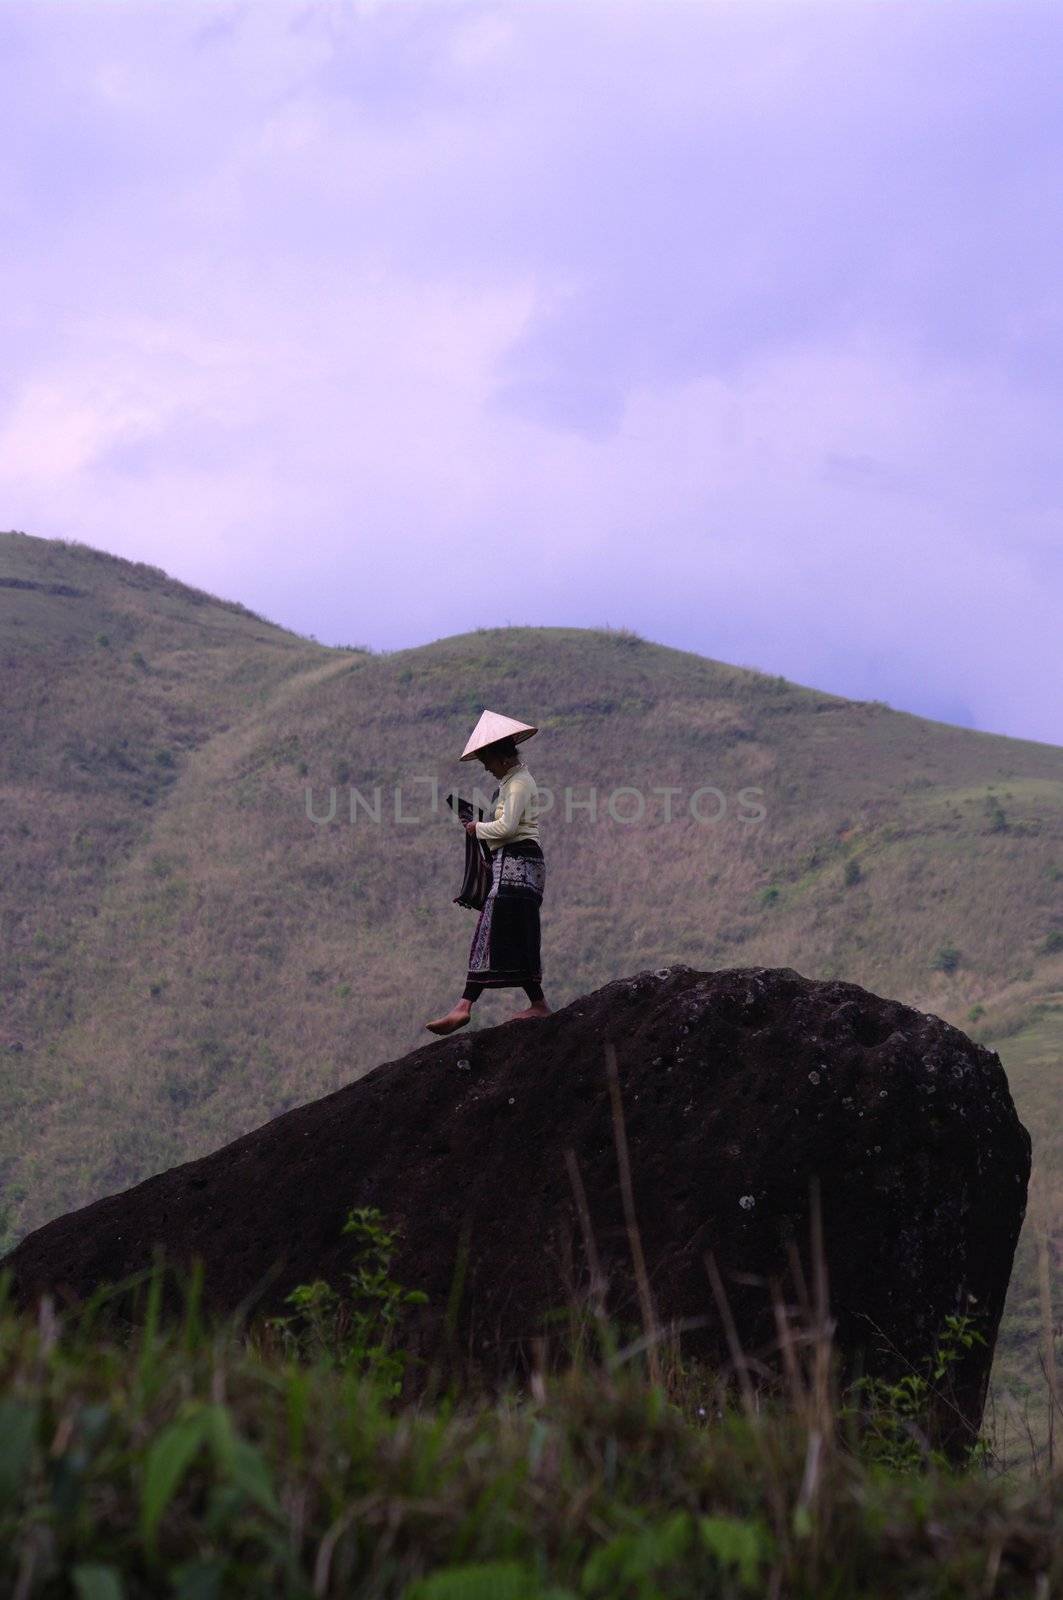 LU woman with her conical hat over his traditional headdress standing on a rock